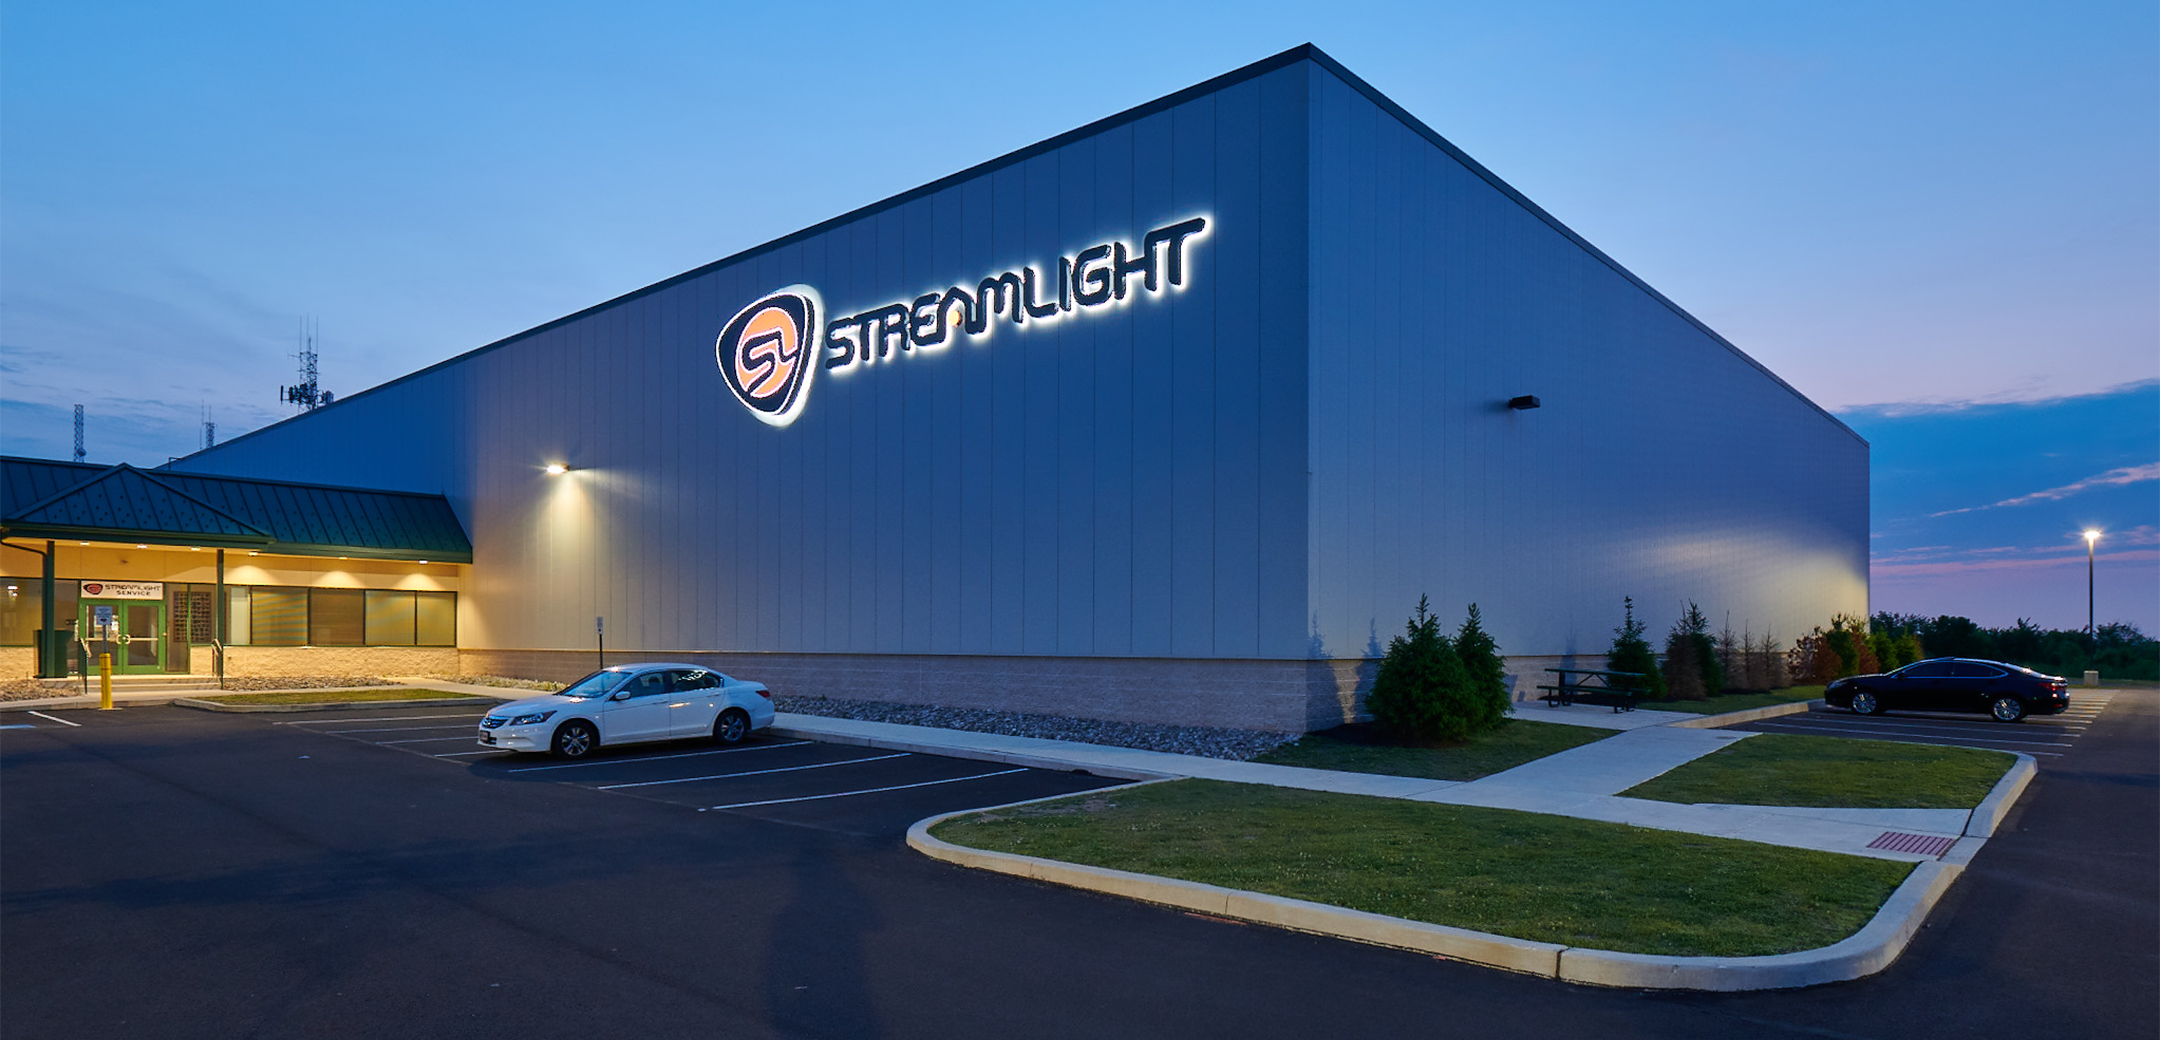 An exterior evening view of the Streamlight warehouse showcasing the lit logo and lettering, front parking and side parking lot.